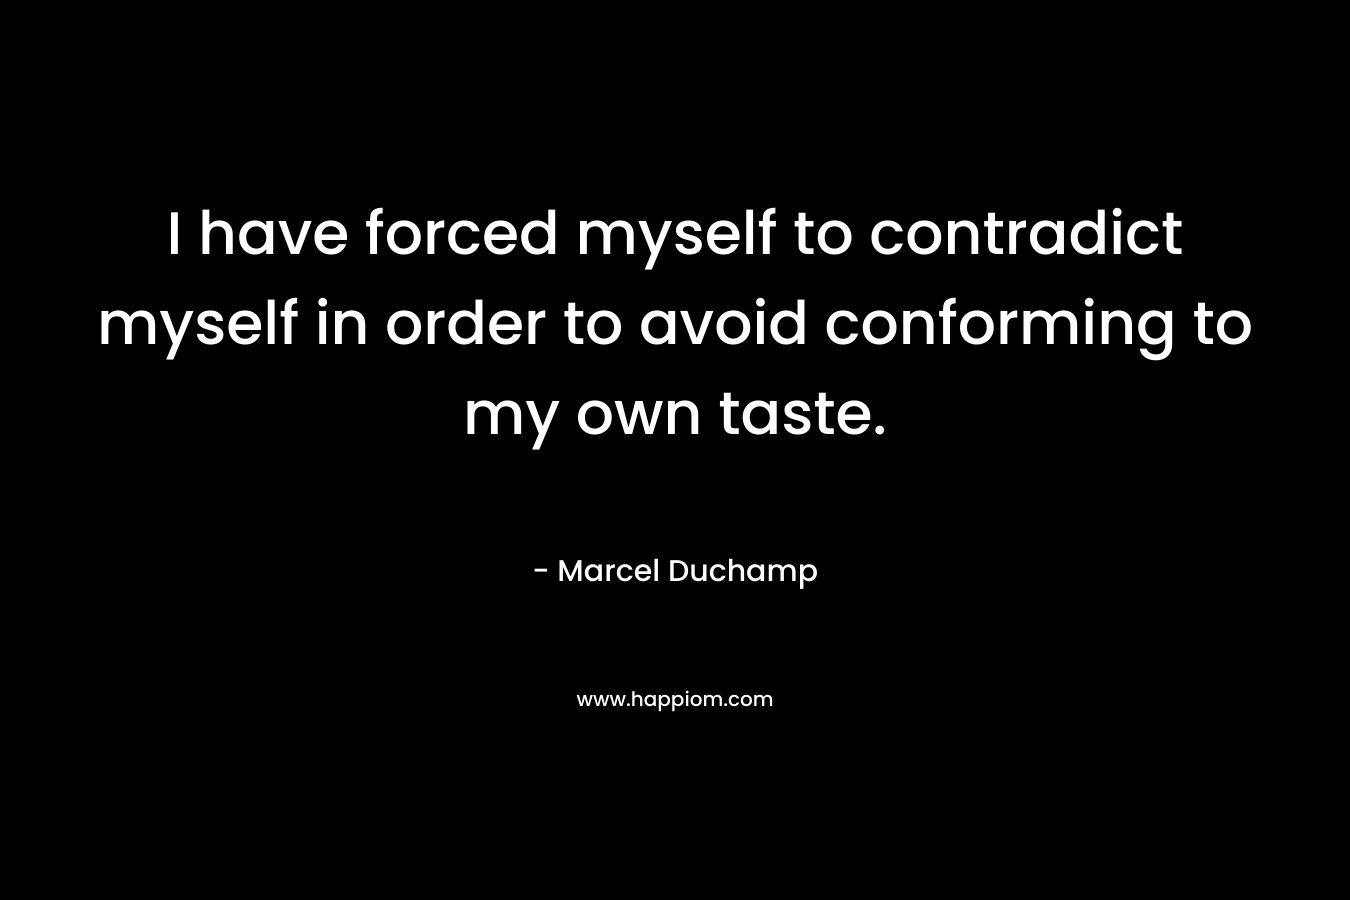 I have forced myself to contradict myself in order to avoid conforming to my own taste. – Marcel Duchamp